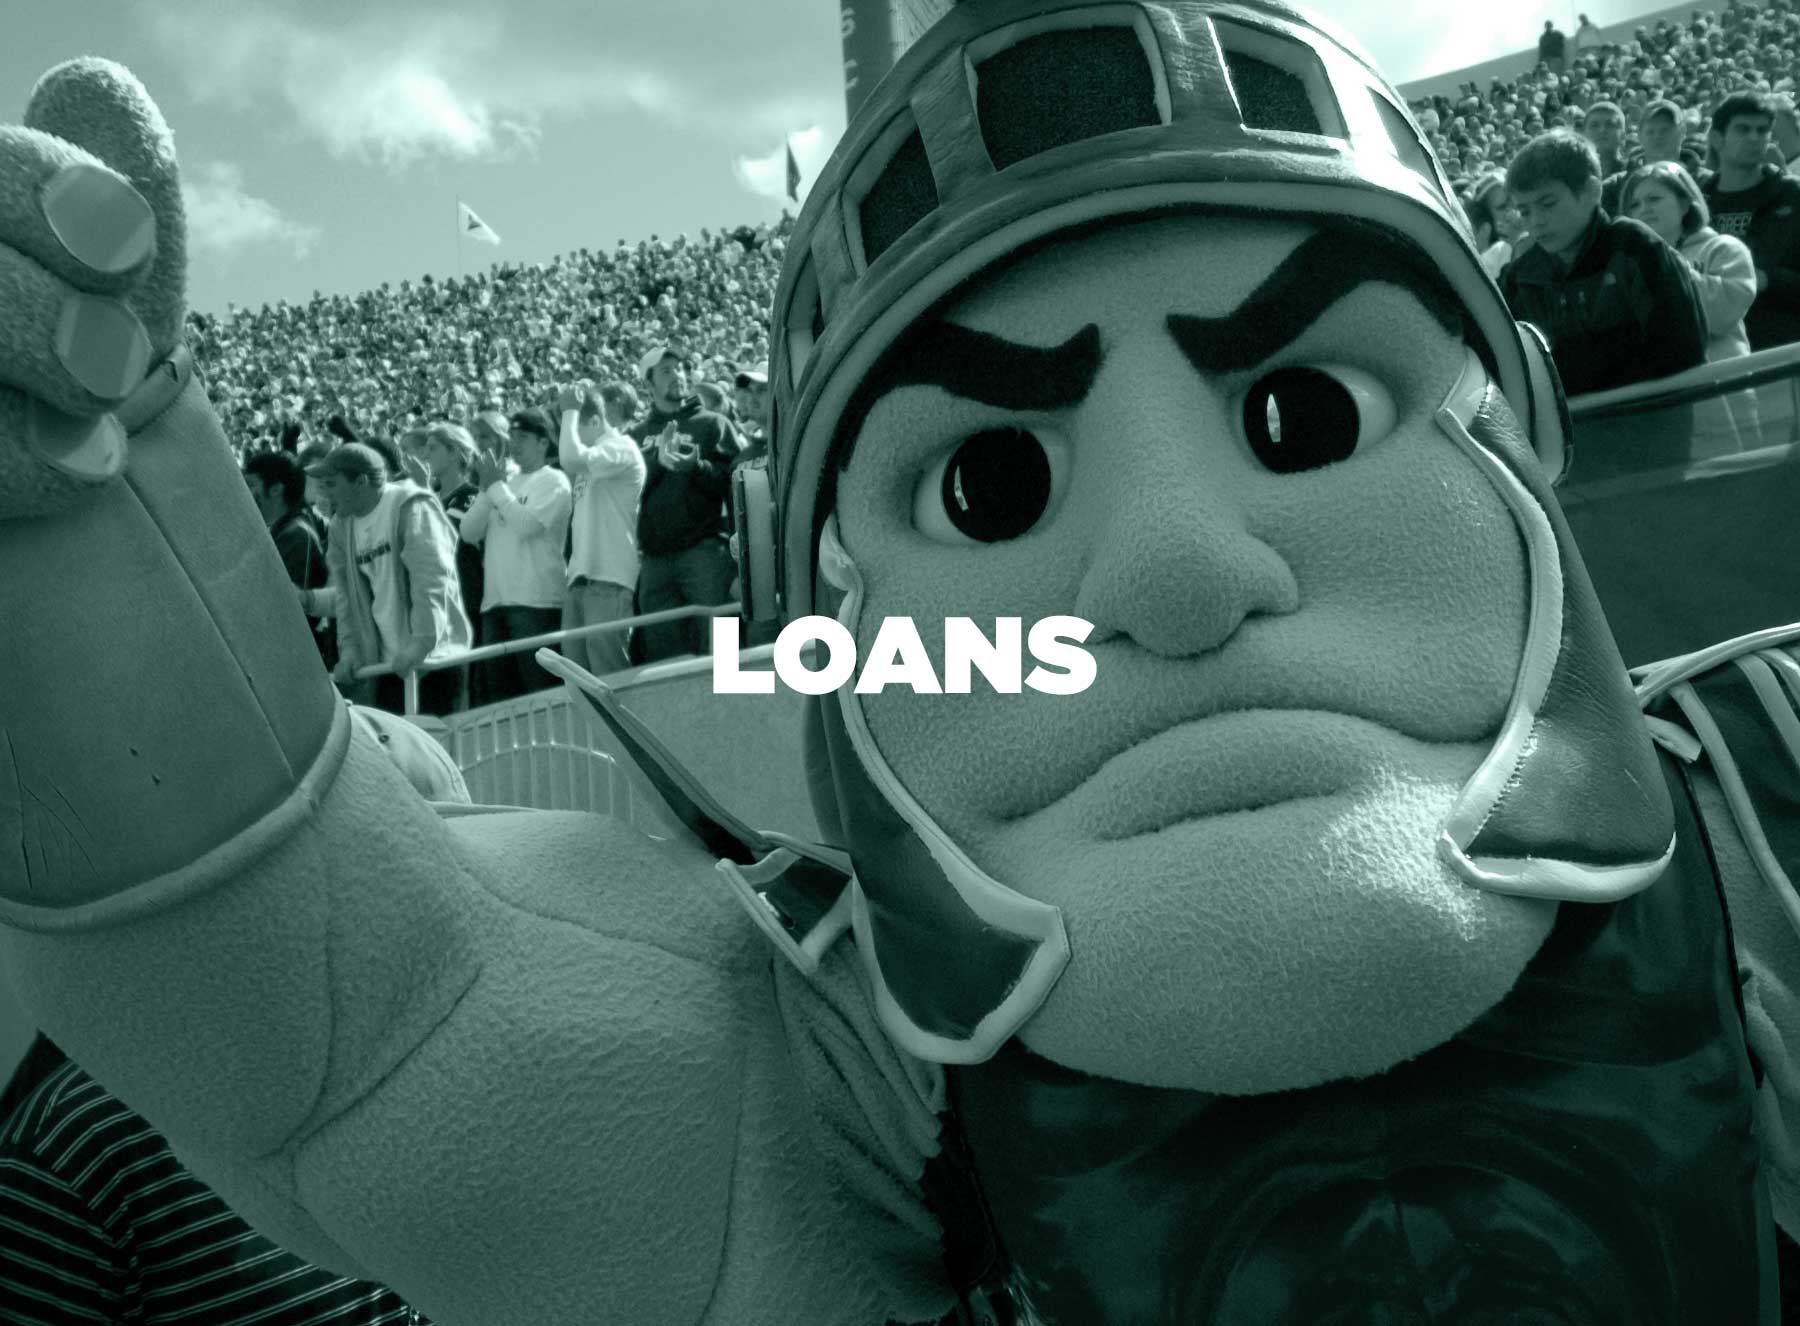 Sparty cheering at a football game